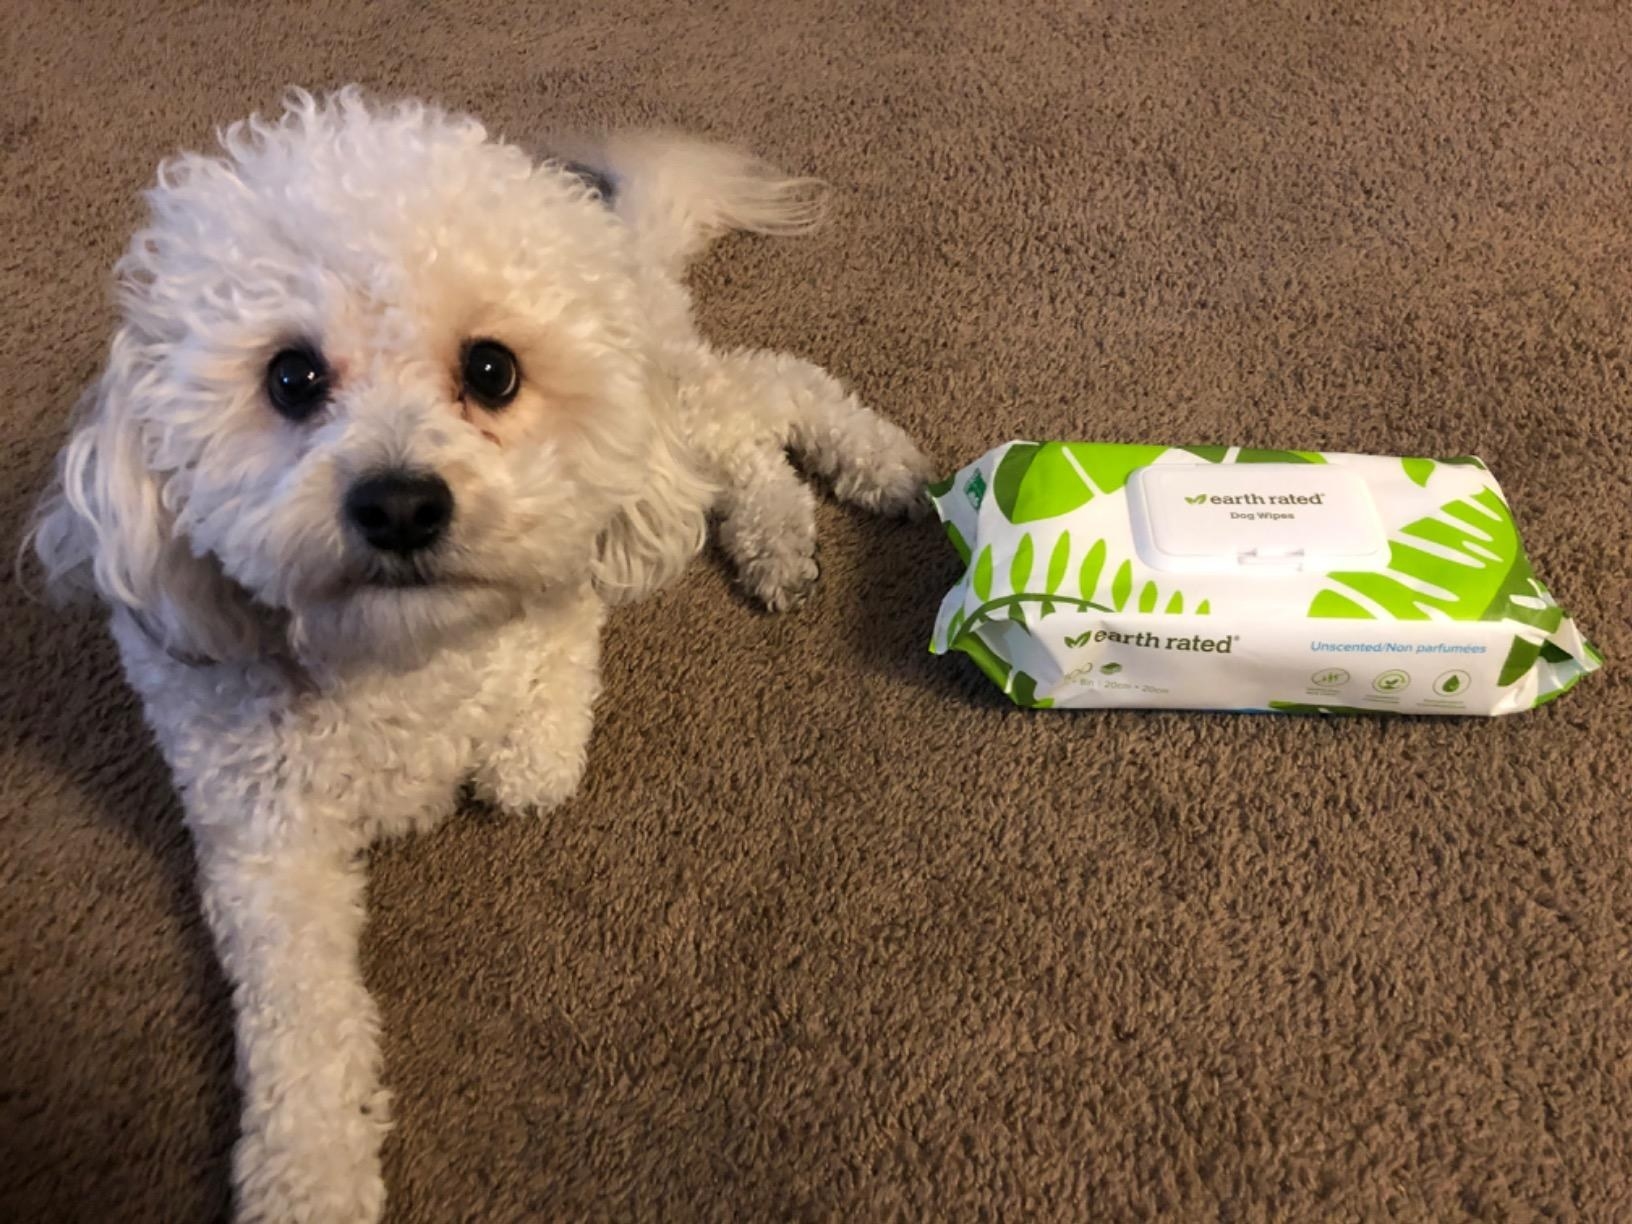 The pack of wipes, unopened, next to a dog